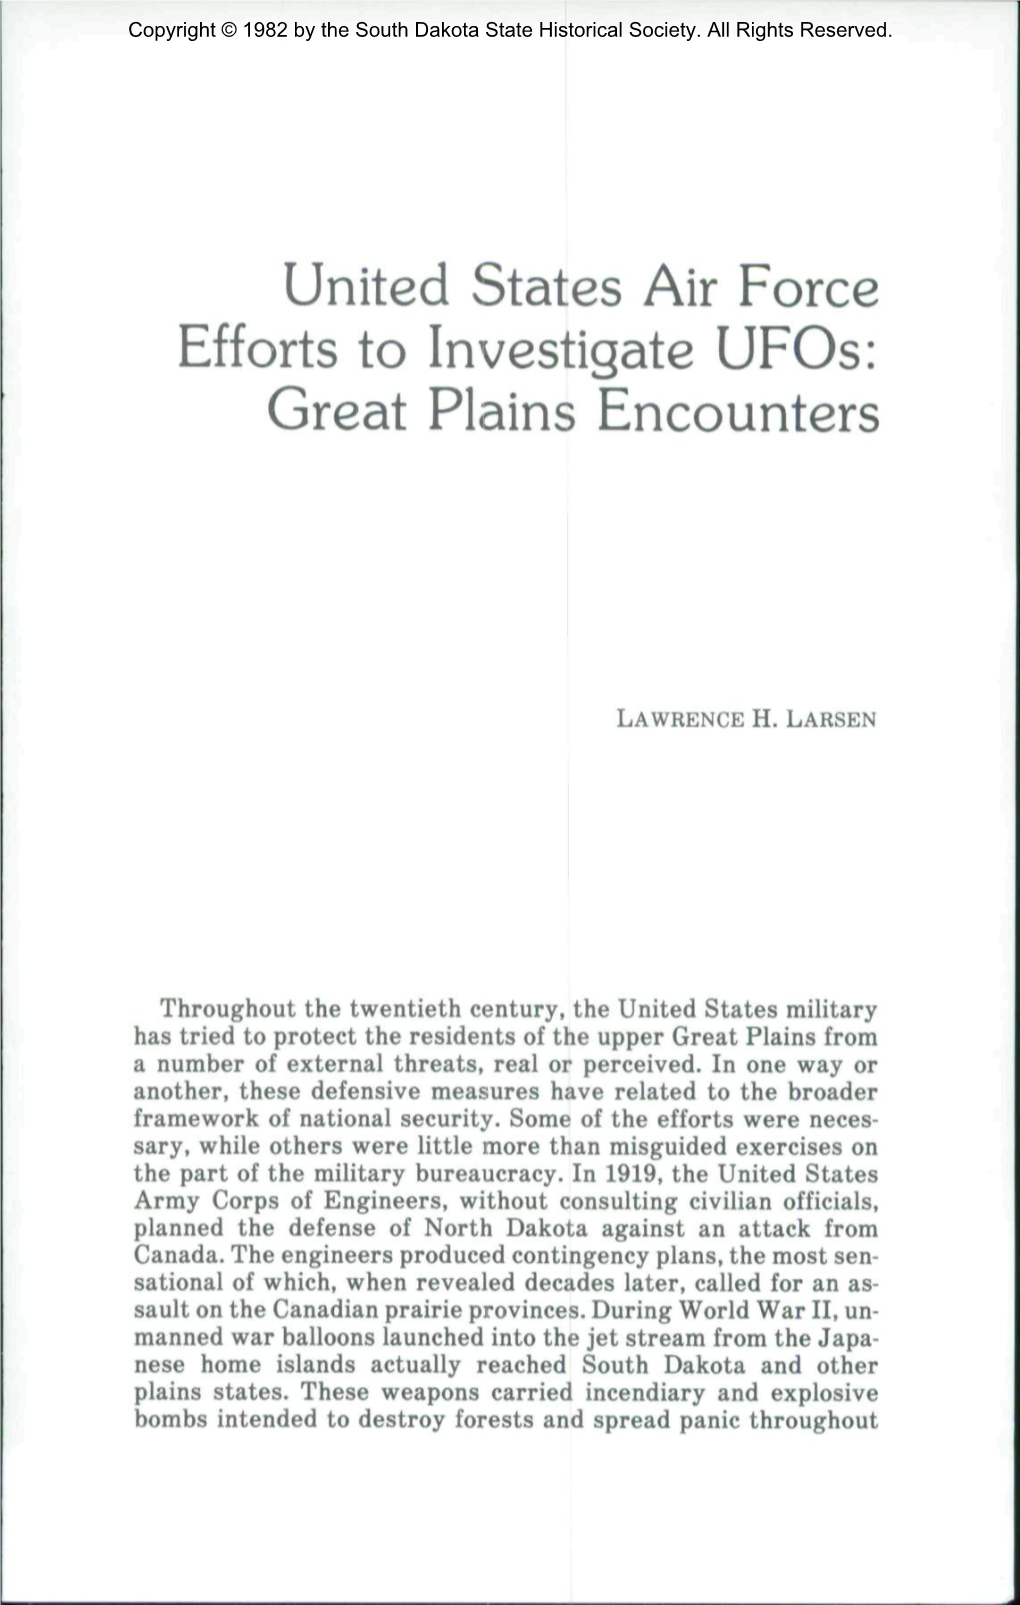 United States Air Force Efforts to Investigate Ufos: Great Plains Encounters